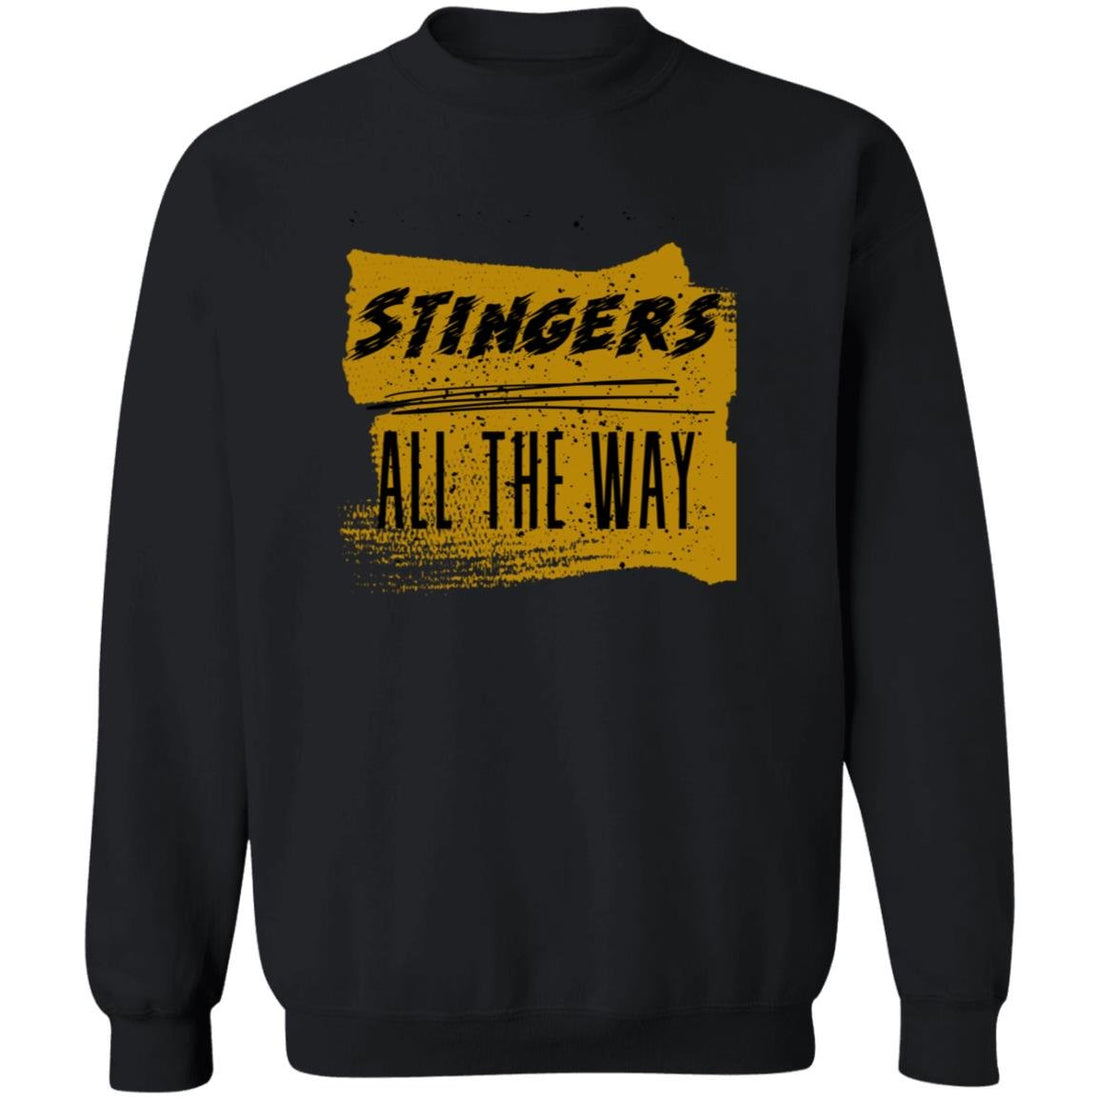 Stingers All The Way Crewneck Pullover Sweatshirt - Sweatshirts - Positively Sassy - Stingers All The Way Crewneck Pullover Sweatshirt